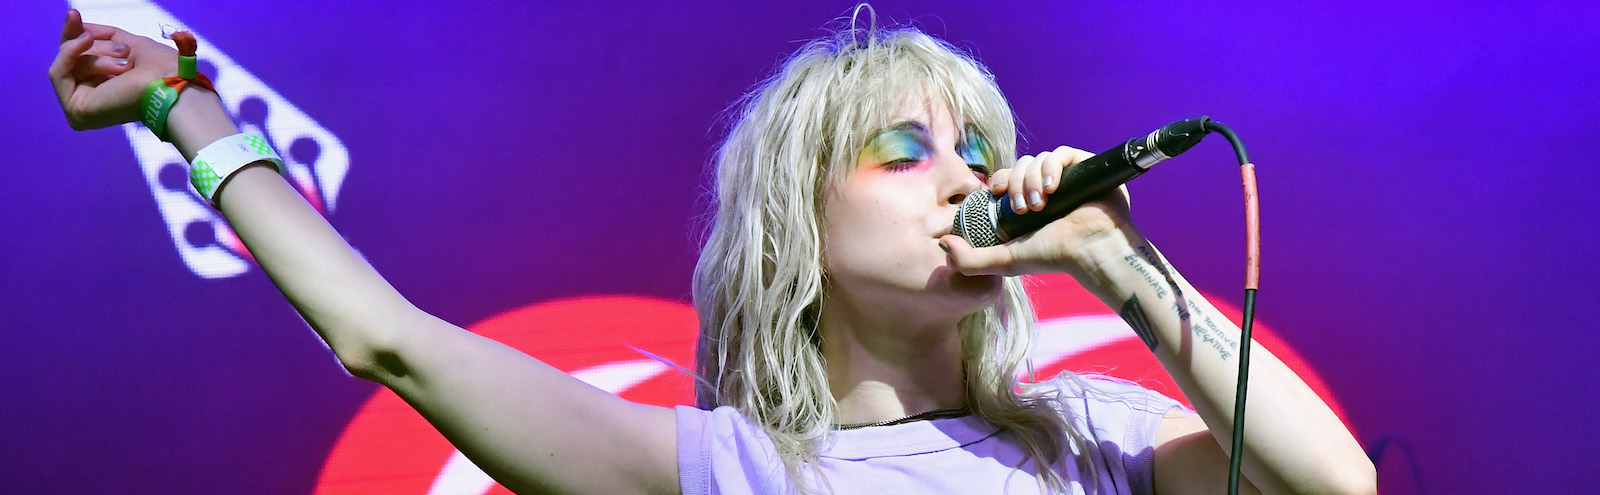 Paramore This Is Why: Album Release Date, Singles, Tour Dates